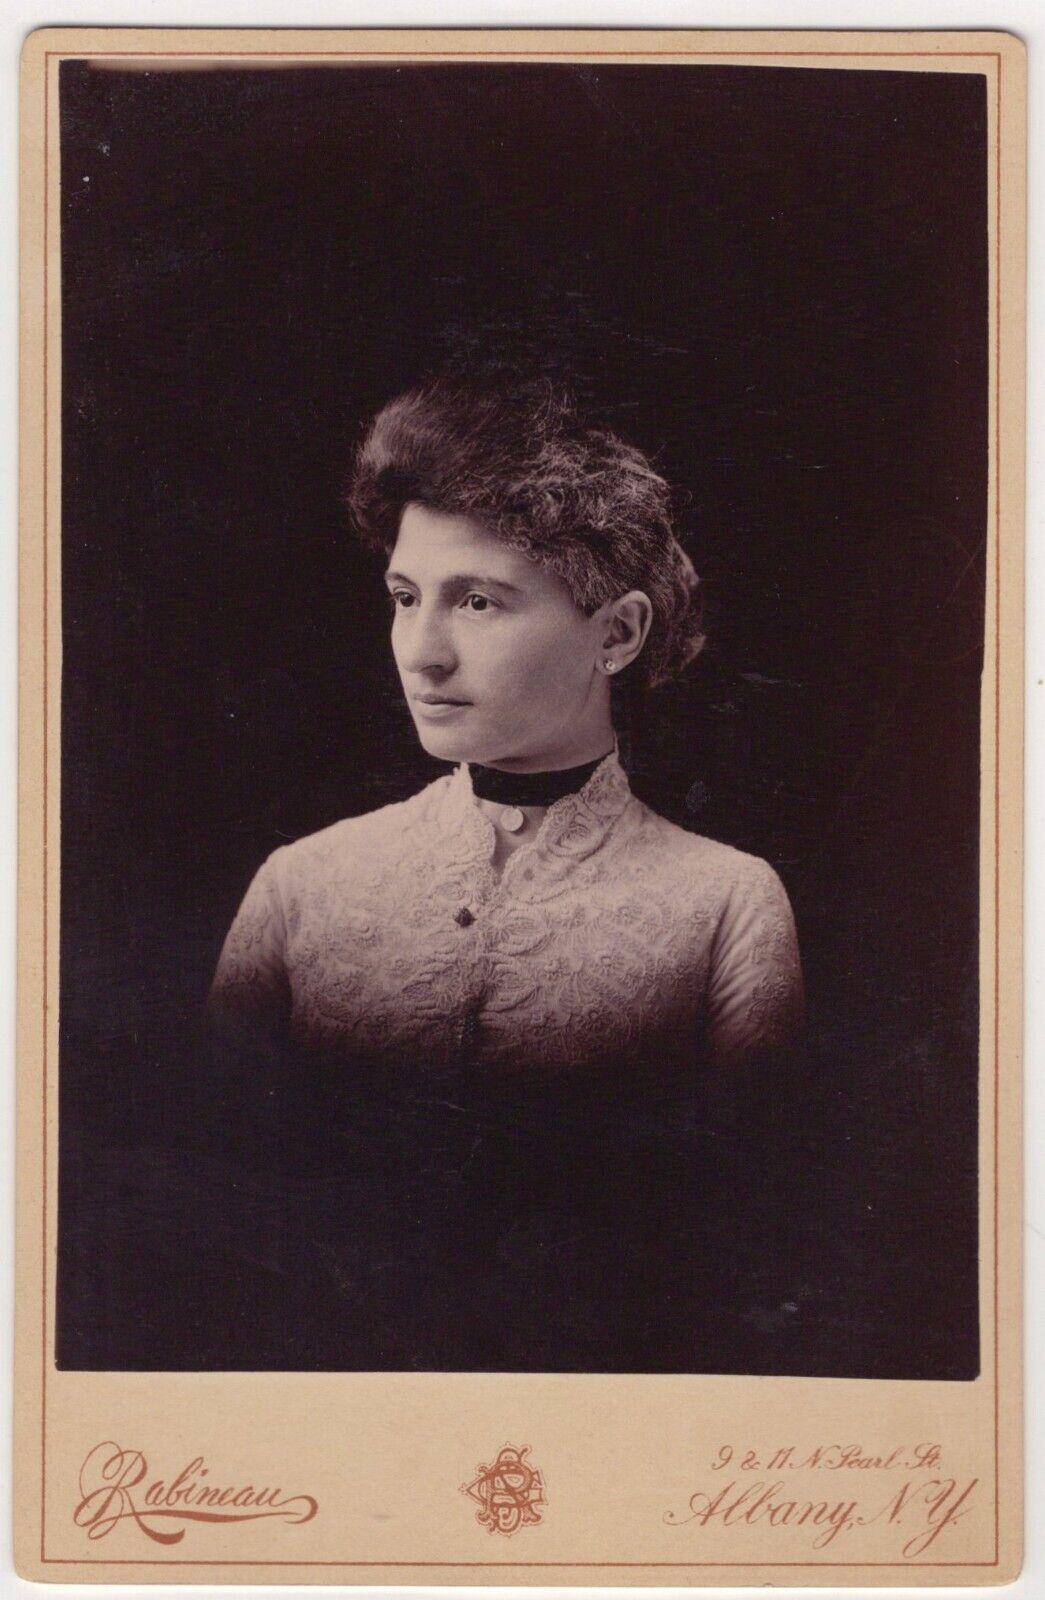 WOMAN IN THE LIGHT : PHOTOGRAPHED IN ALBANY, NEW YORK: CABINET CARD